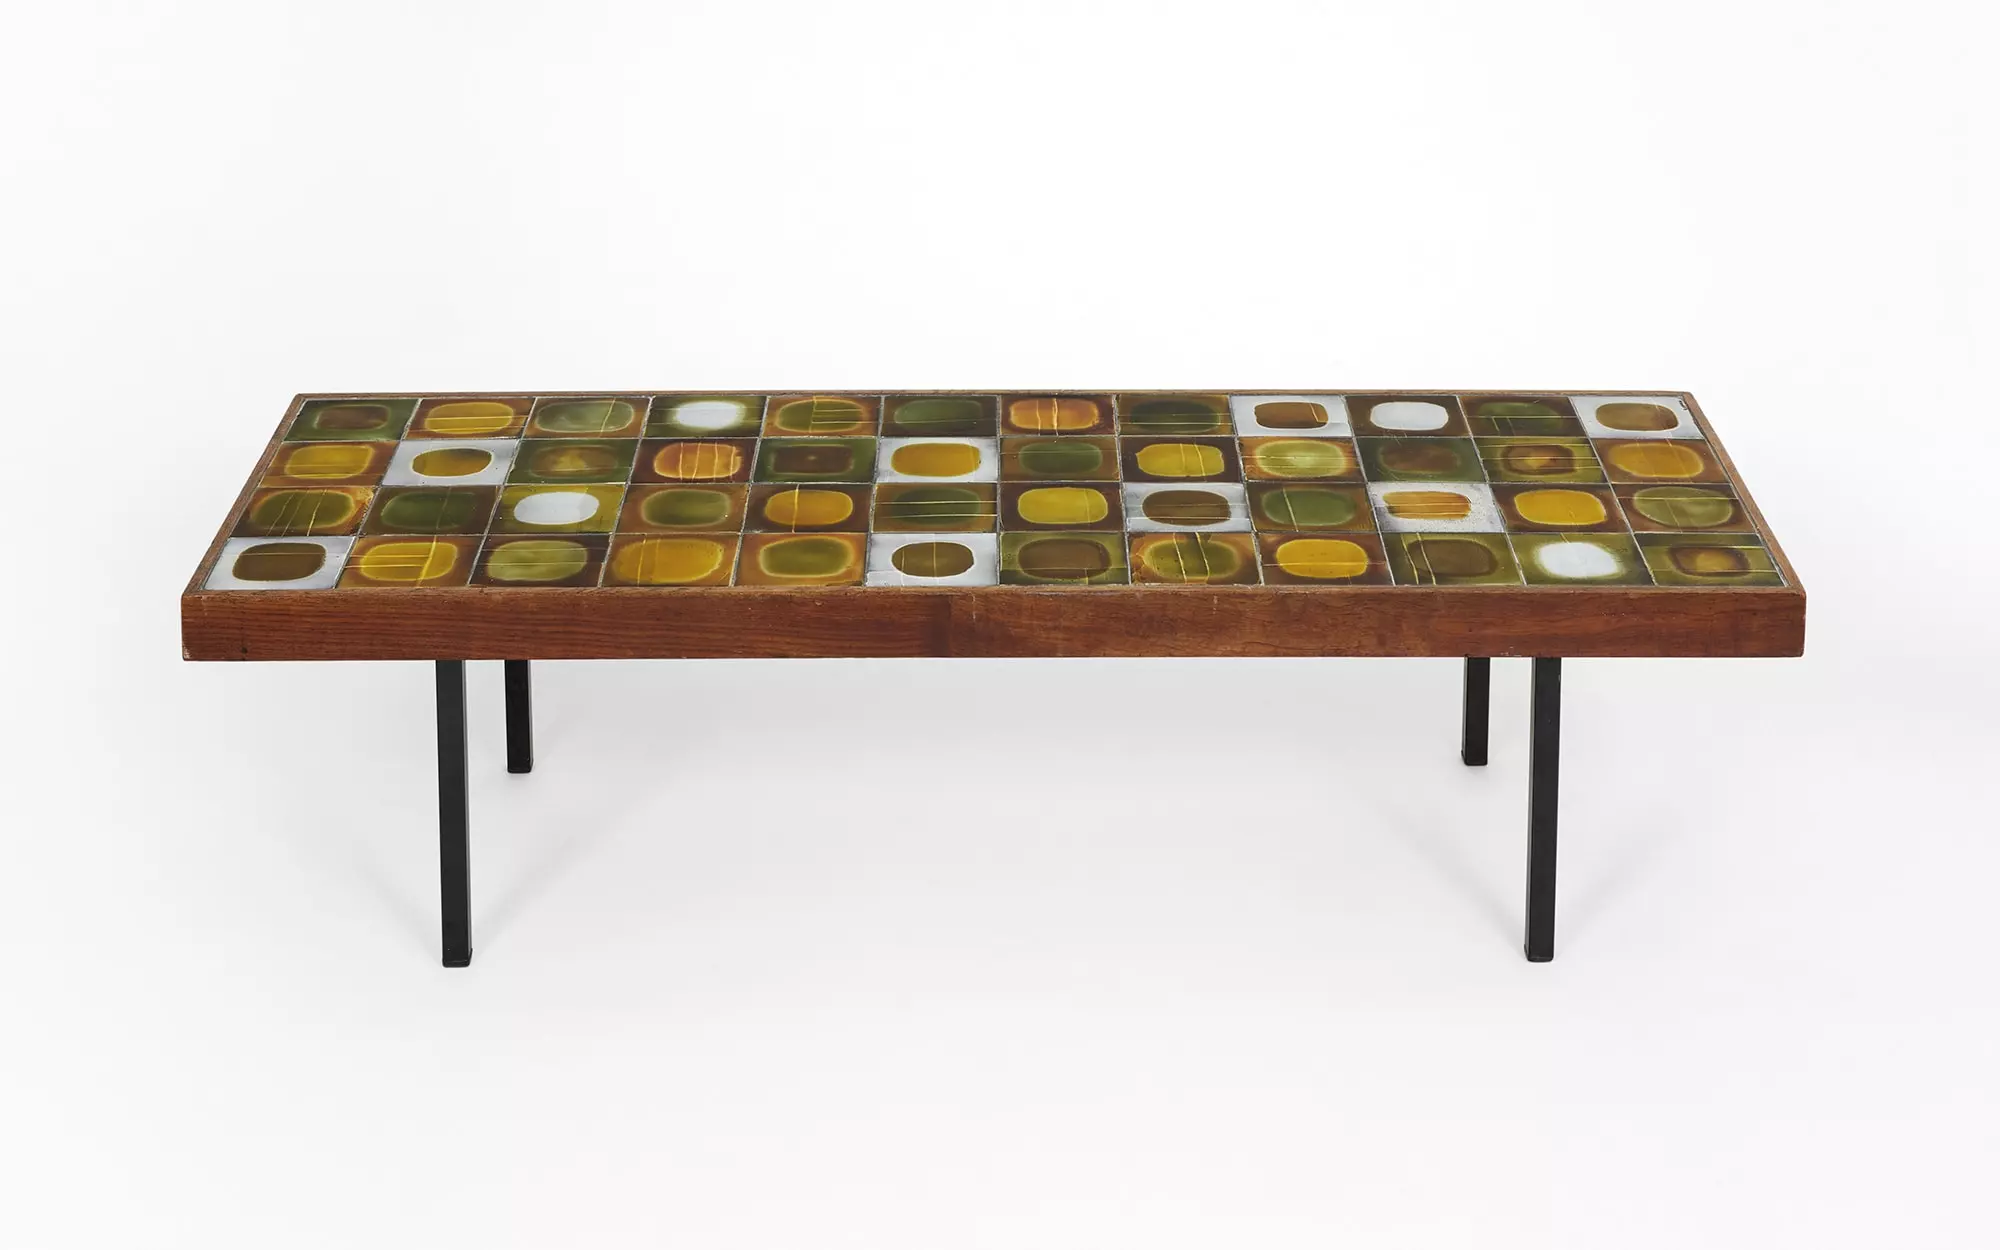 Planet - Roger Capron - Coffee table - Galerie kreo